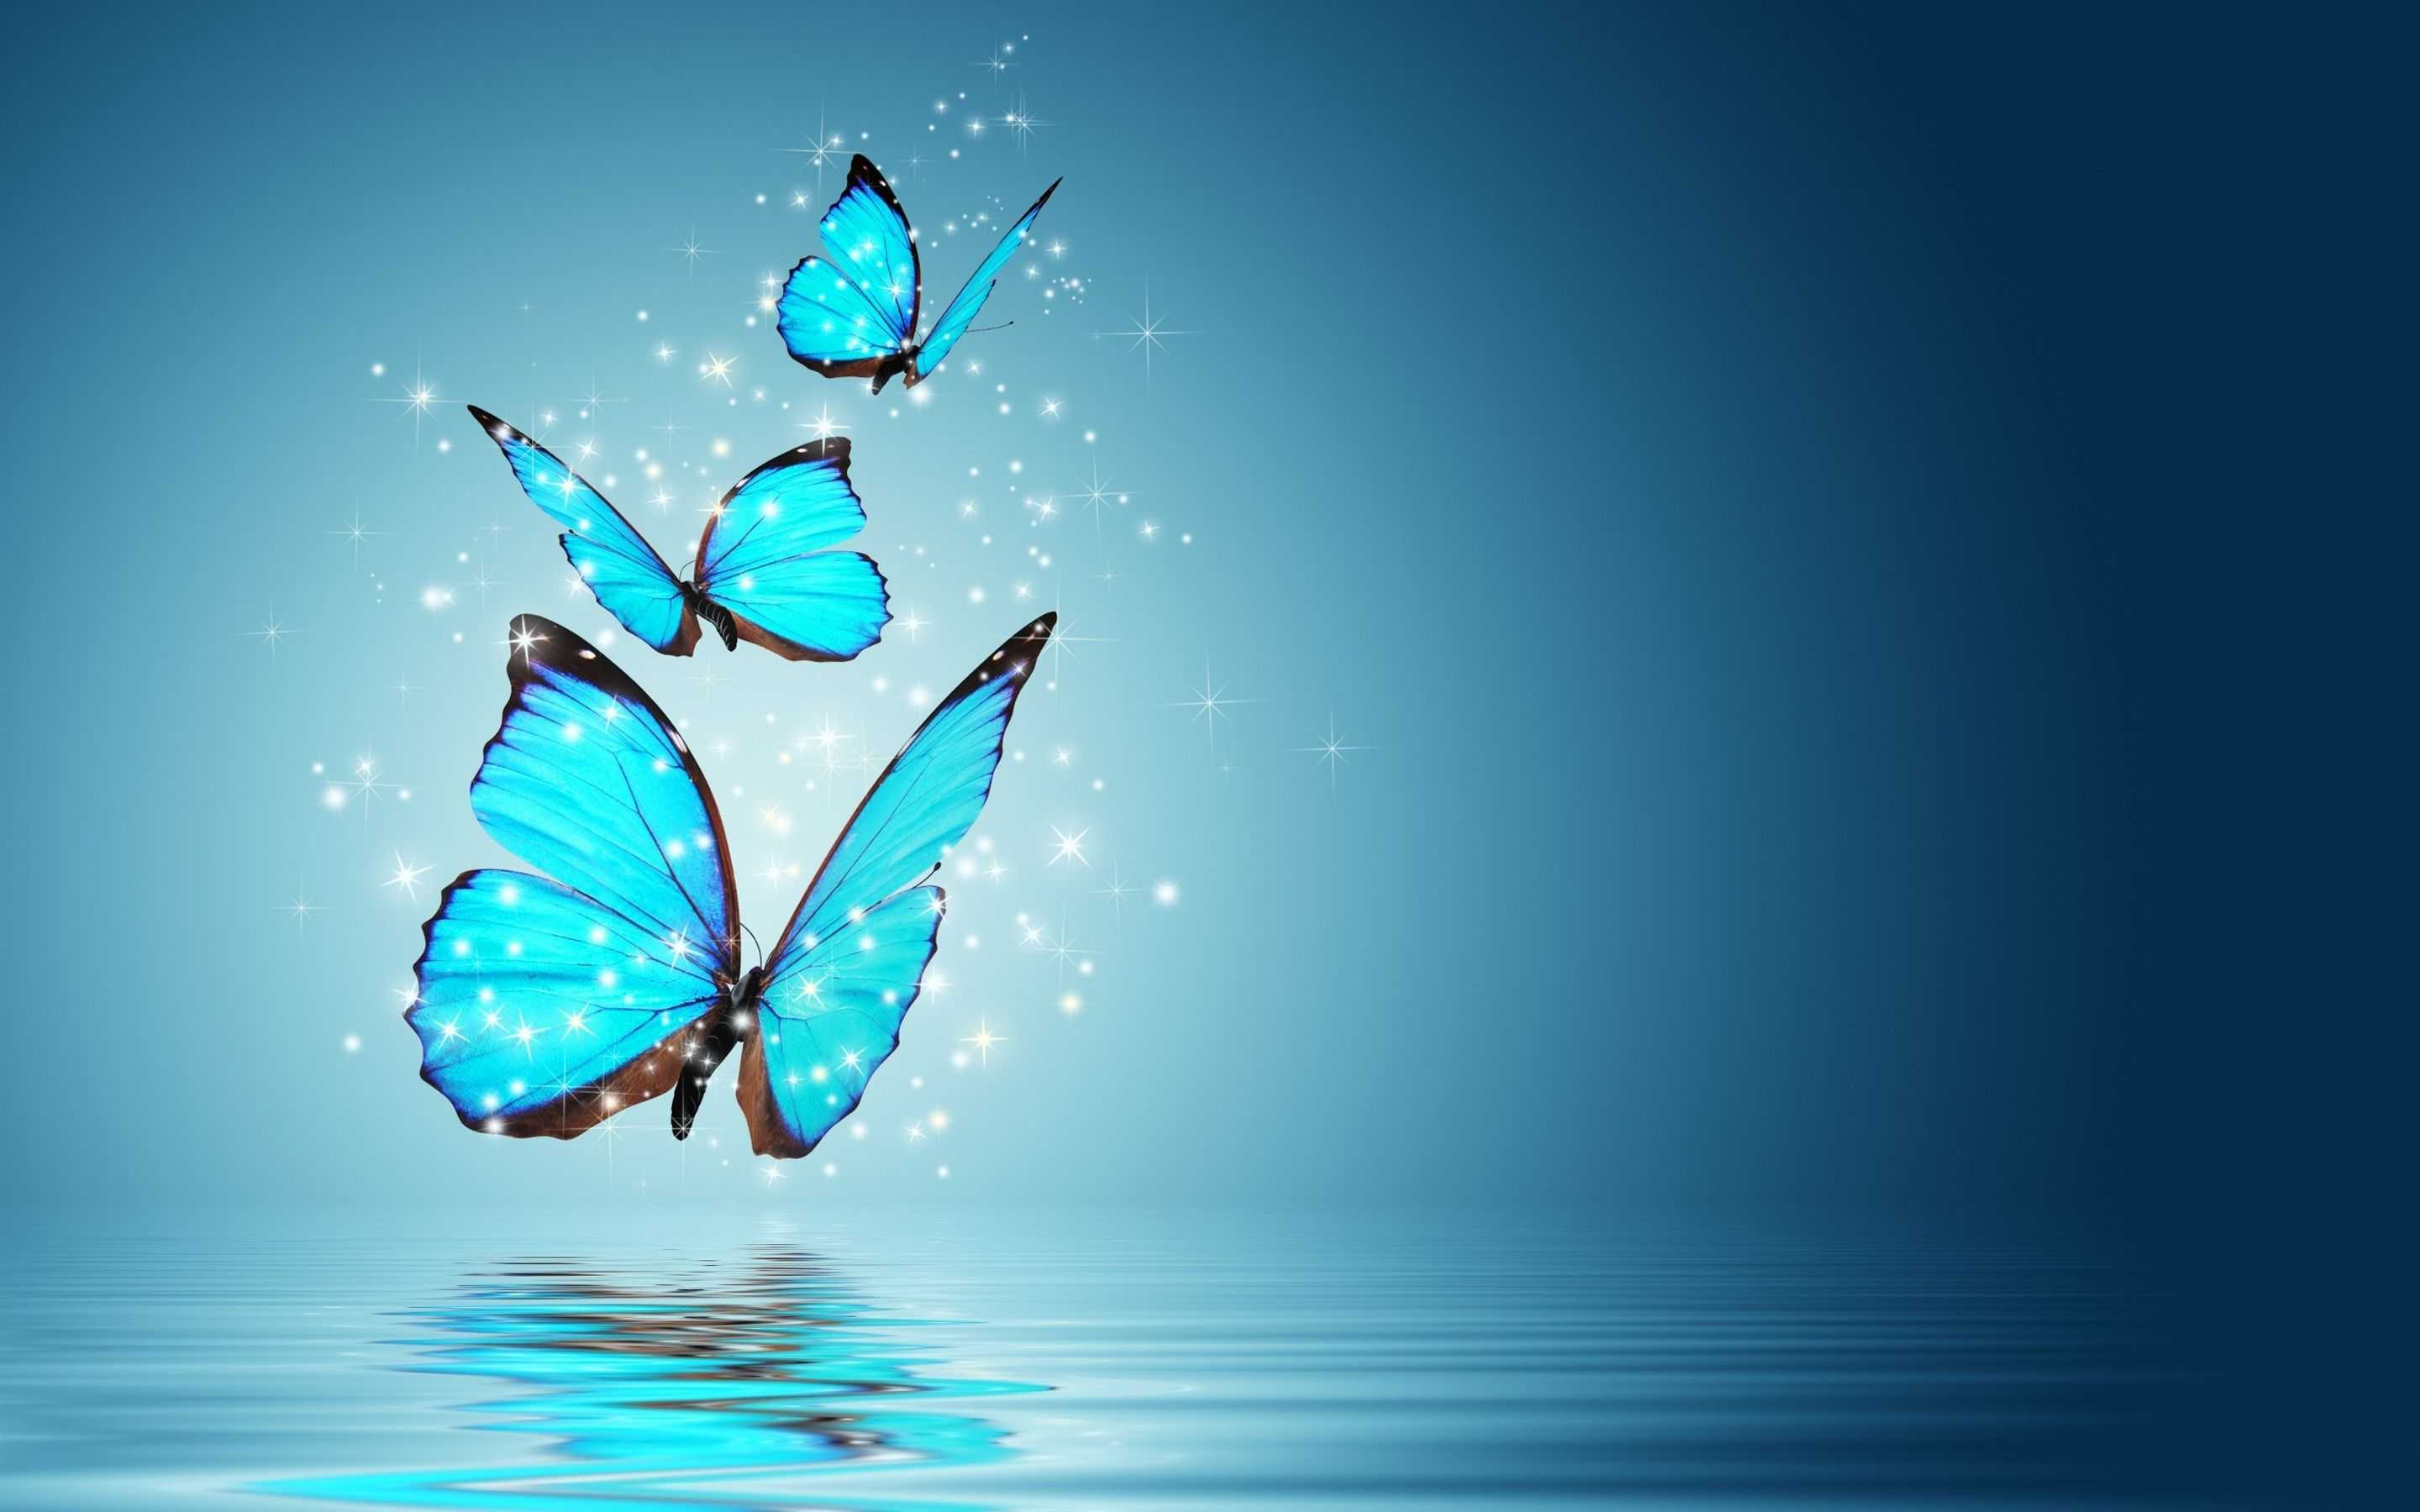 Blue Butterfly Wallpaper - NawPic